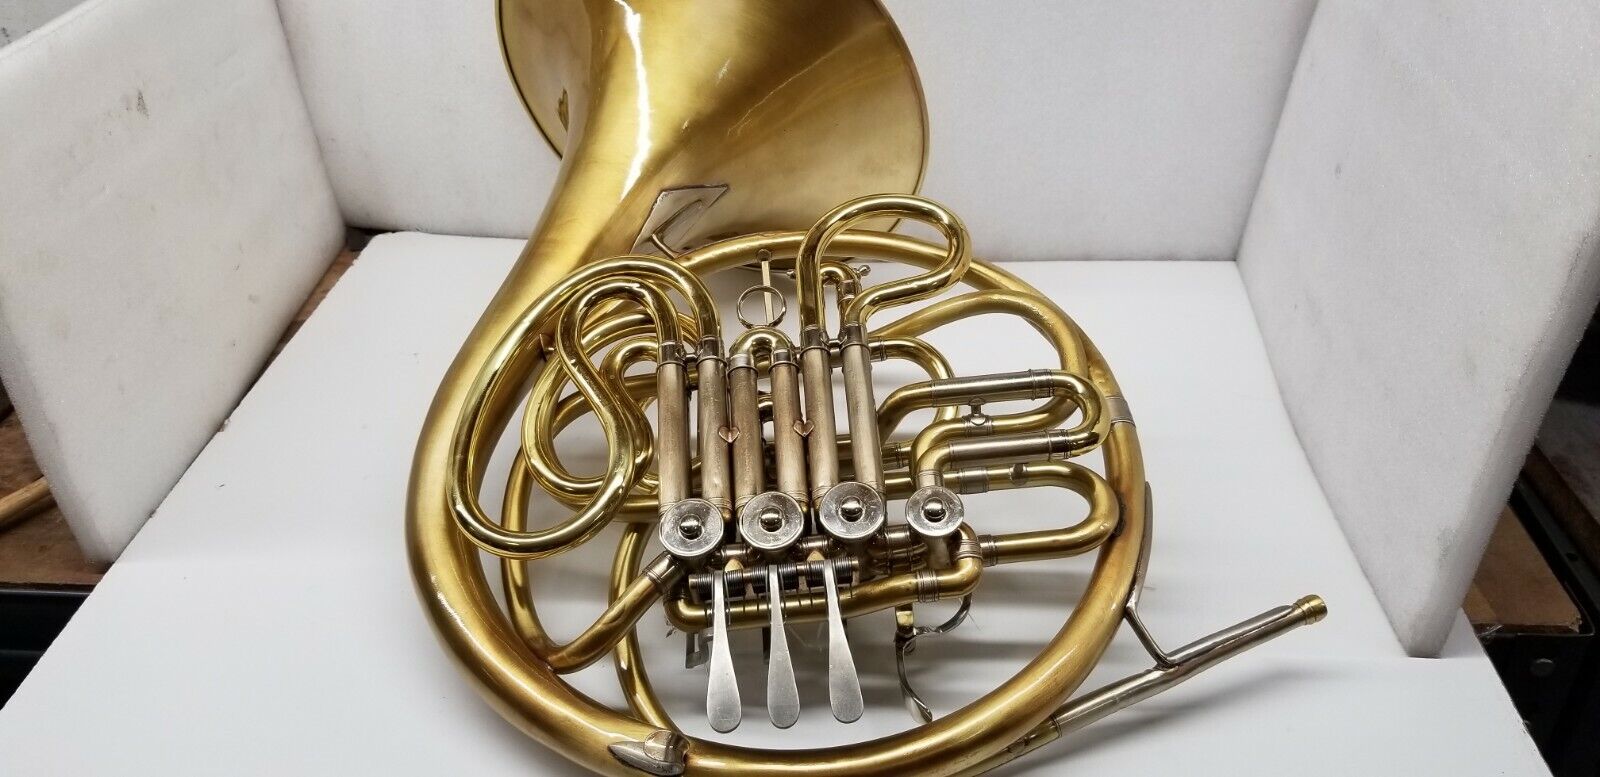 1970 C.G CONN 6D DOUBLE FRENCH HORN WITH CASE IN VERY GOOD CONDITION.